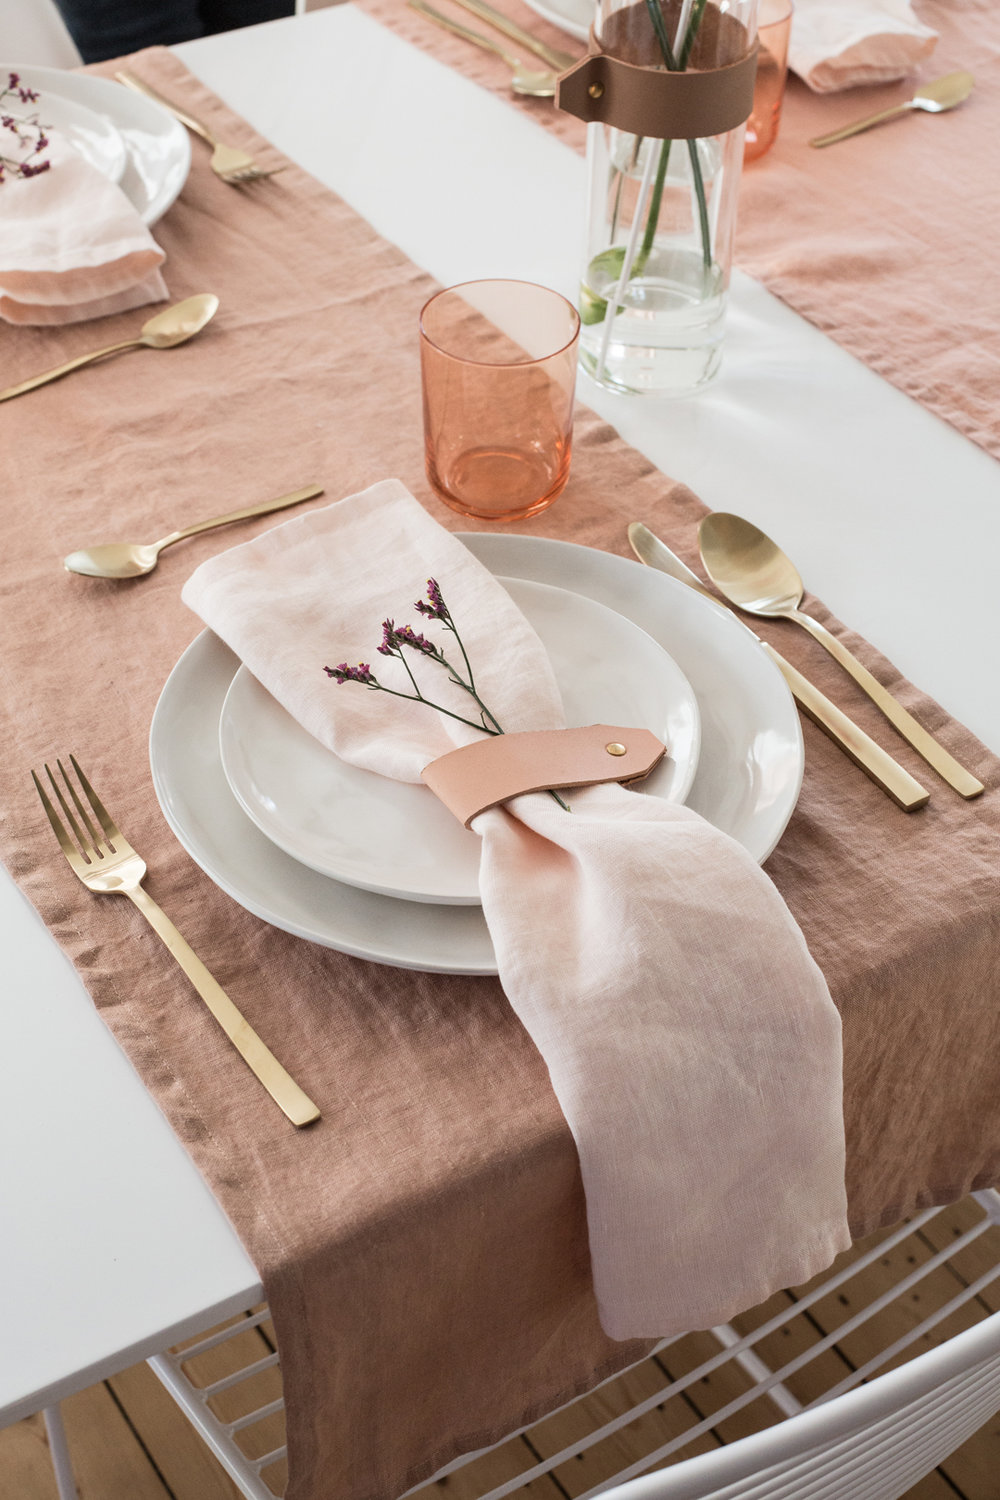 Orange glassware (perfect for a Brunch table!), faux-leather napkin rings, also look beautiful with the linens.